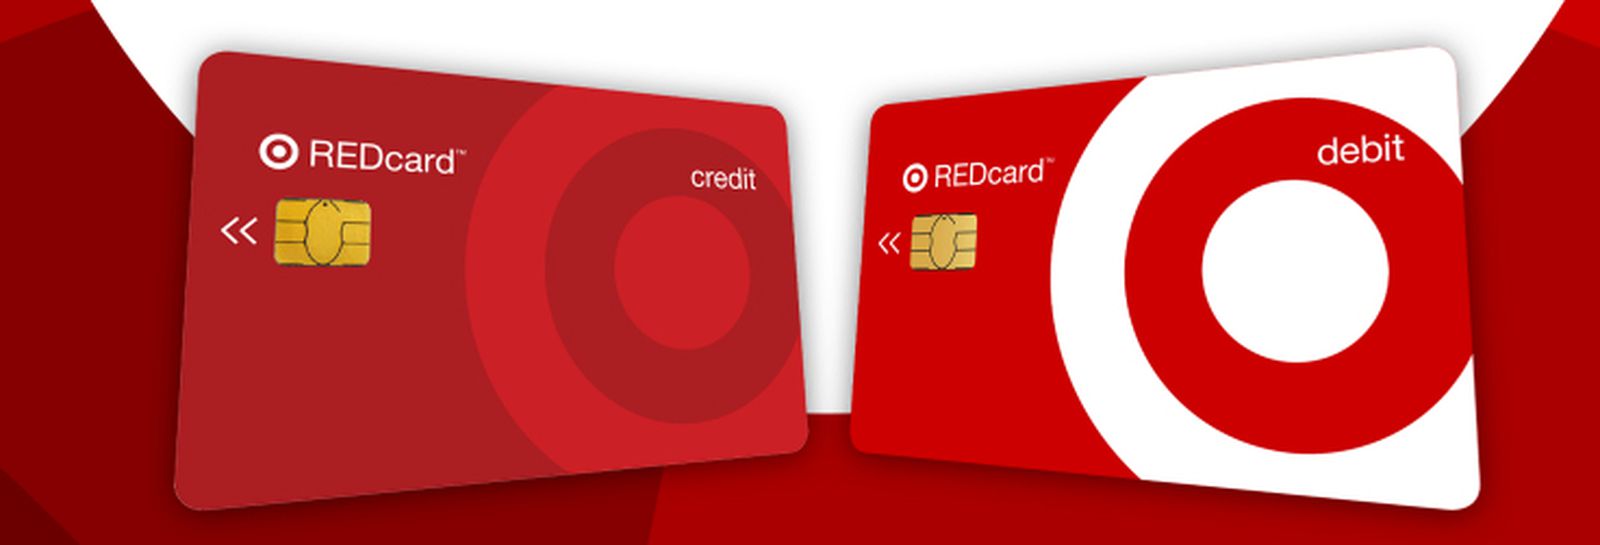 Target Confirms Apple Pay Won't Include REDcard - MacRumors